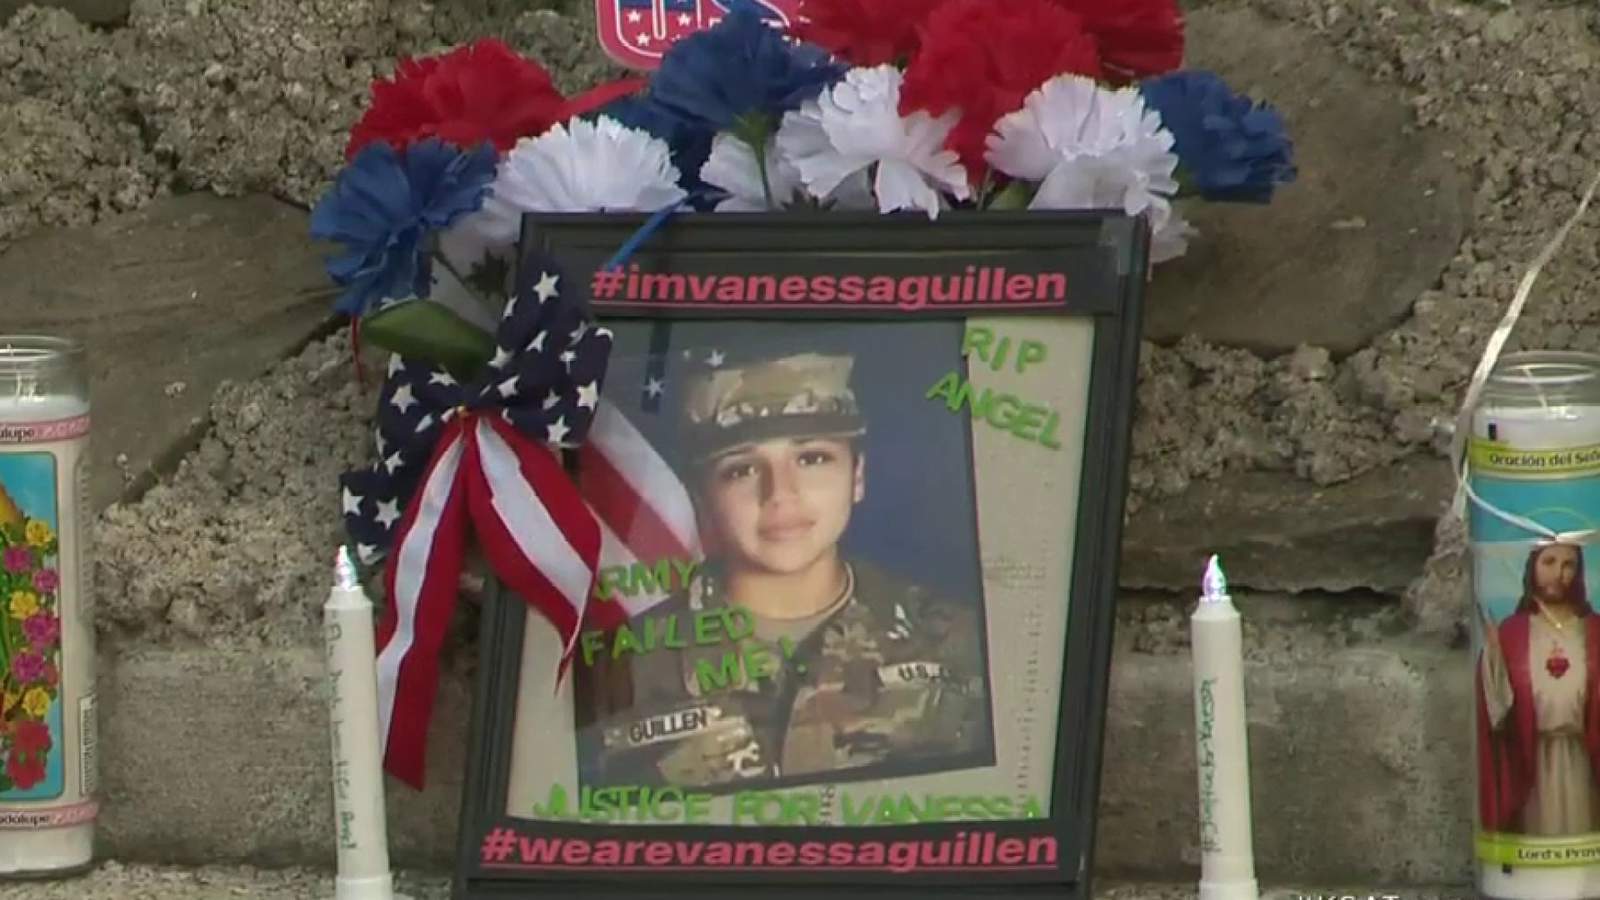 Fort Hood officials to give update on Vanessa Guillen investigation as lawmakers demand independent investigation